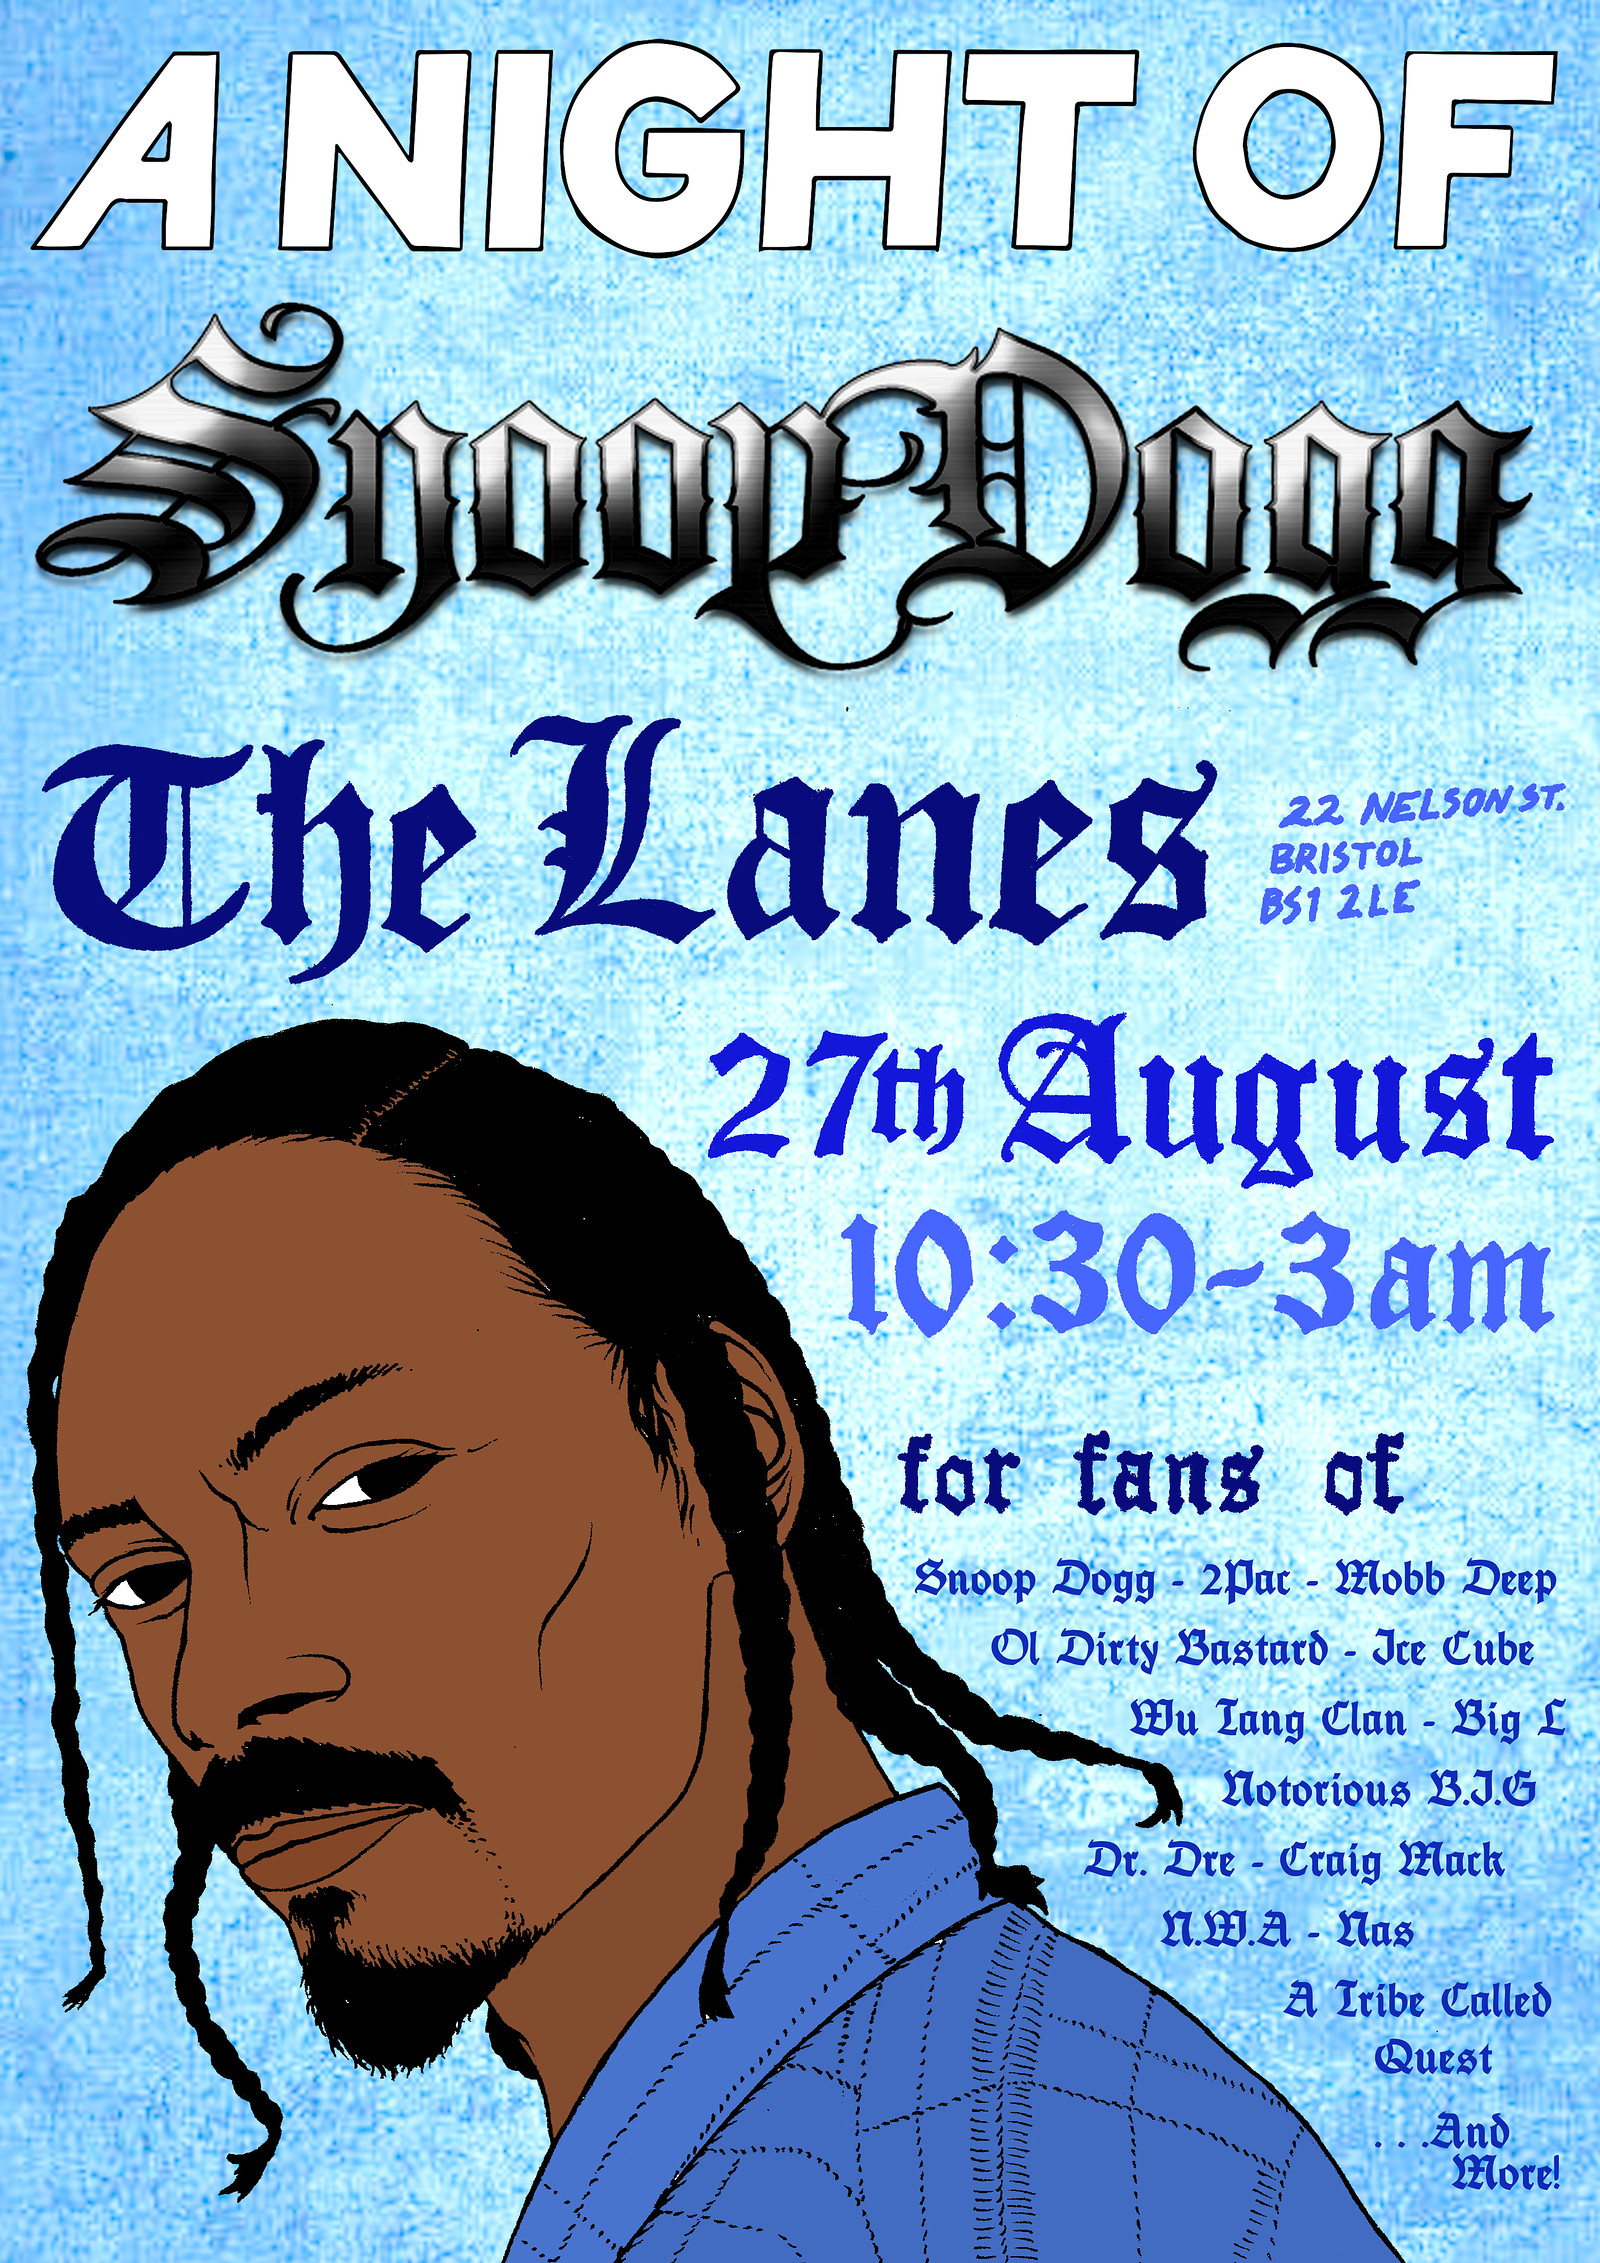 A Night Of: Snoop Dogg at The Lanes